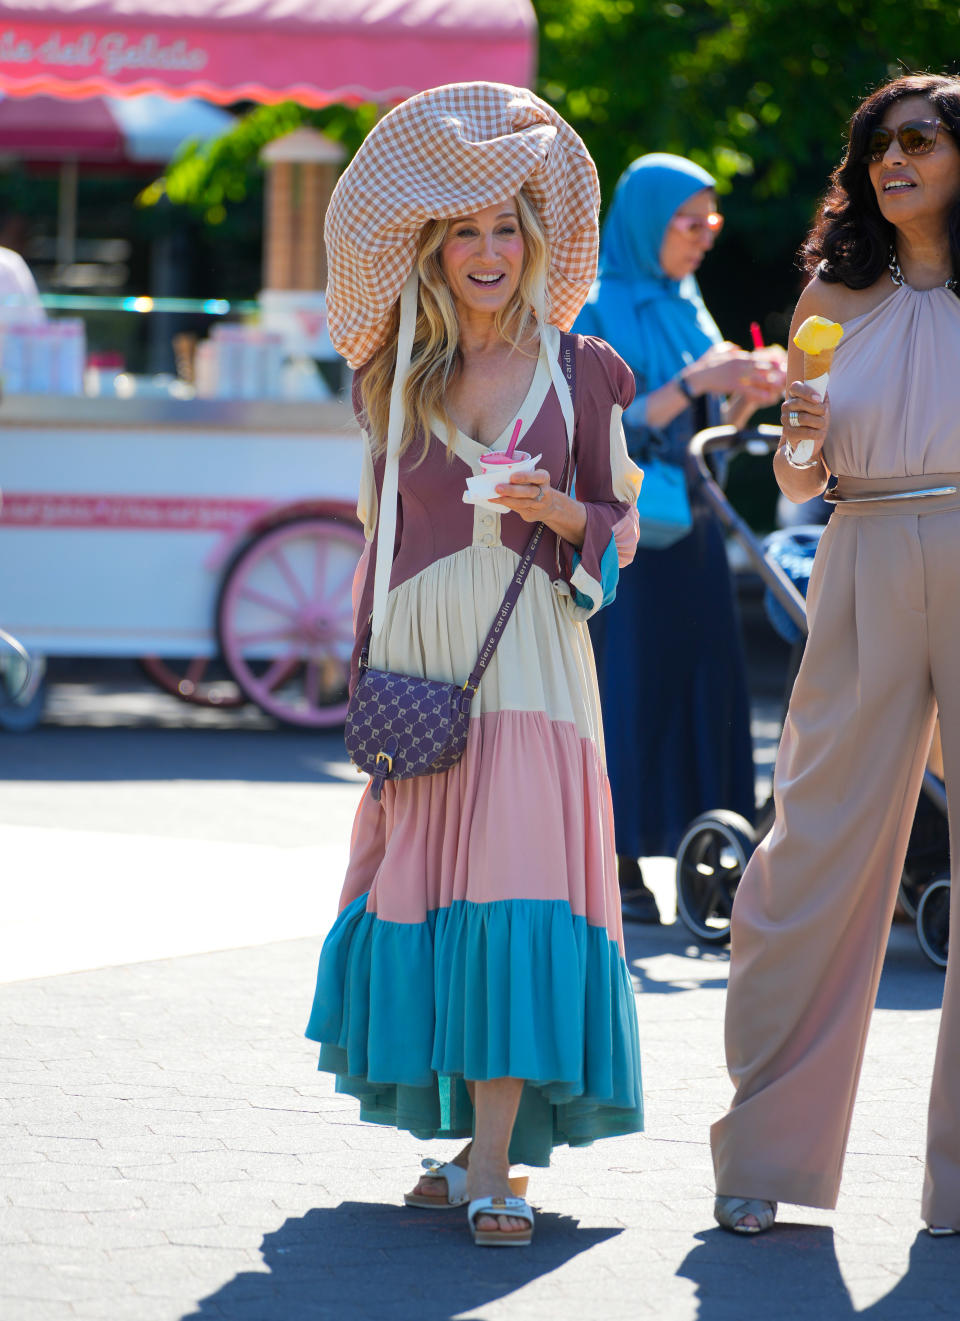 Sarah Jessica Parker on location for 'And Just Like That' wearing the Original Sandals from Dr. Scholl's